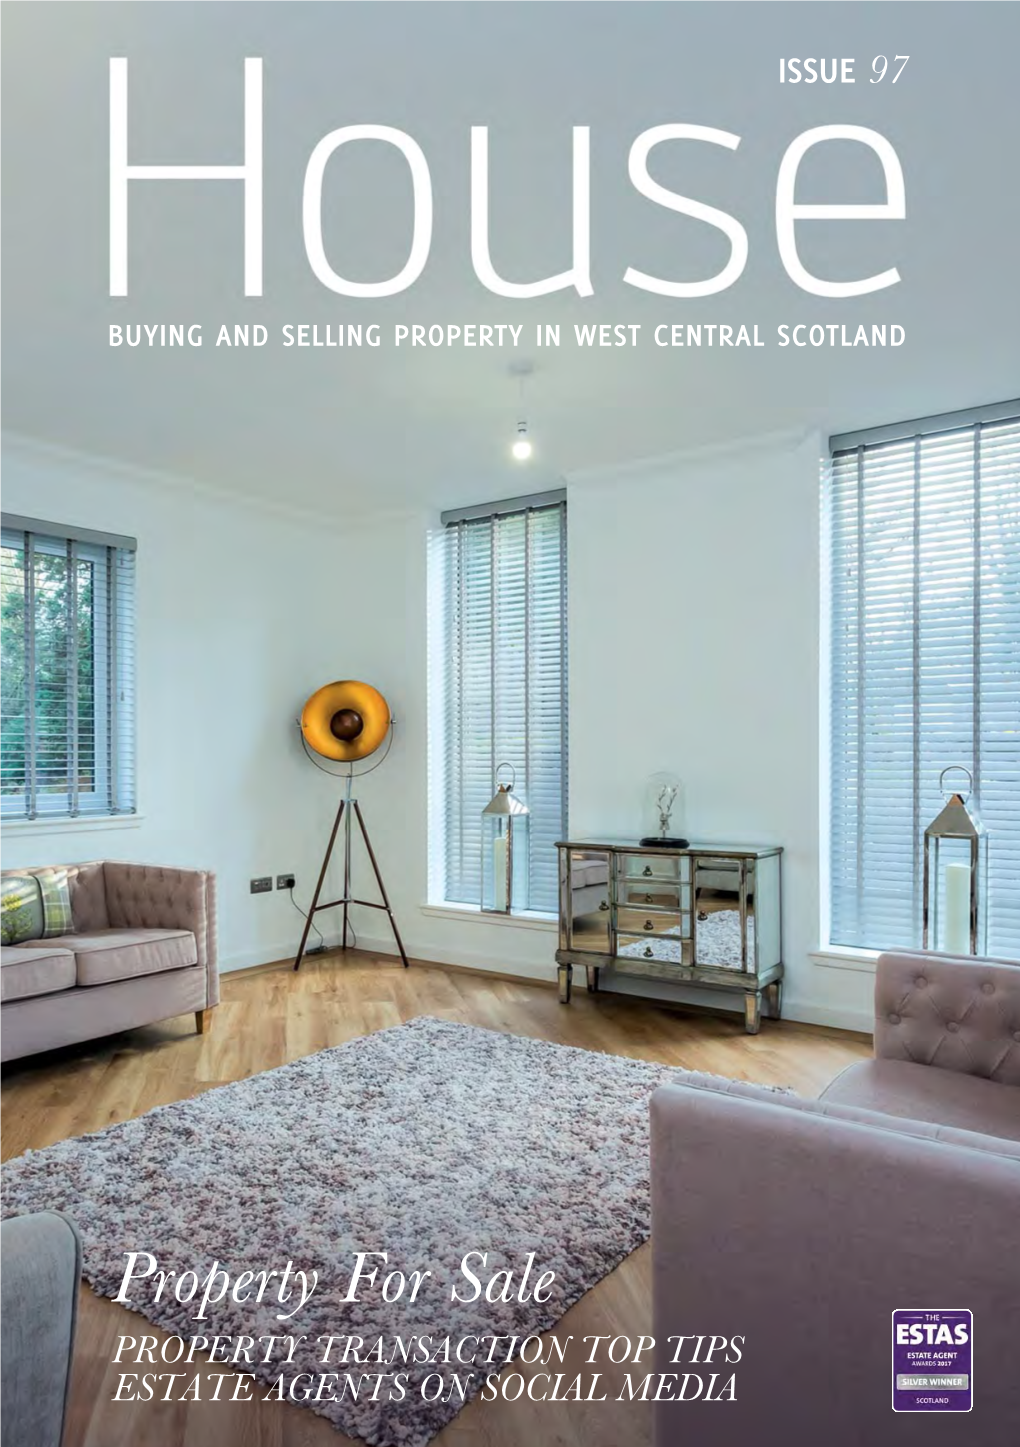 Property for Sale PROPERTY TRANSACTION TOP TIPS ESTATE AGENTS on SOCIAL MEDIA Contents 5 WELCOME Our Introduction to House Magazine